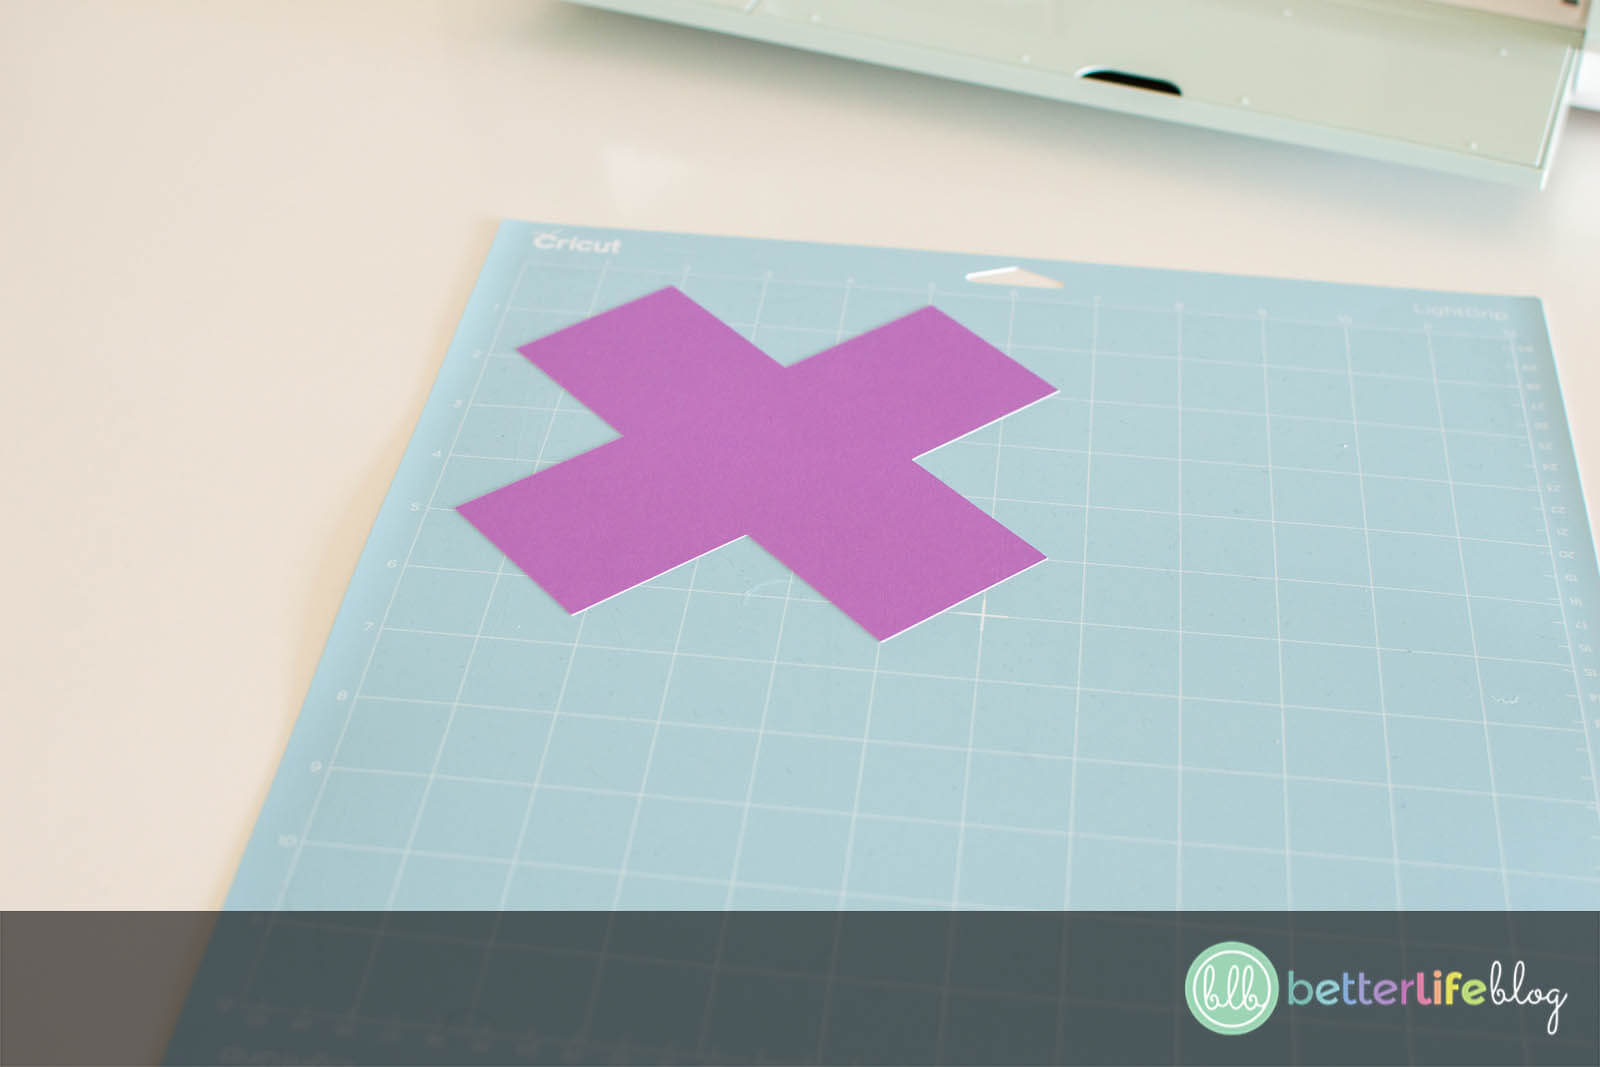 A piece purple cardstock in the shape of an "x" on a light grip mat